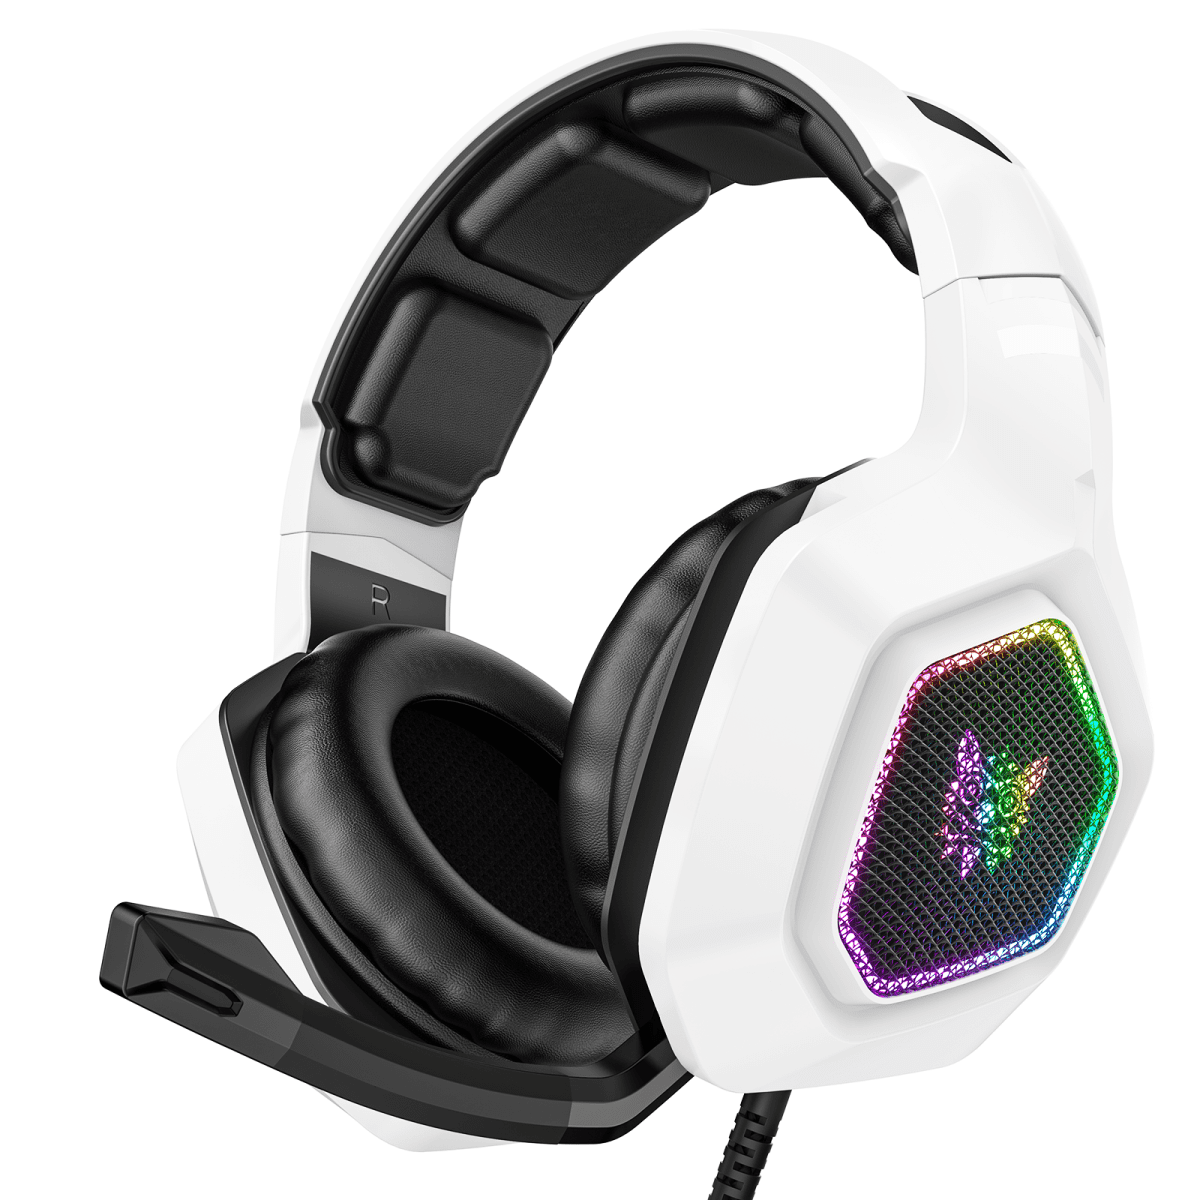 ONIKUMA K10 Gaming Headset for PS4 PS5 Xbox One Switch and PC, Over-Ear Headphones with Microphone, RGB Light, Stereo Bass Surround, Soft Memory Earmuffs for PC Mac Computer Games, White